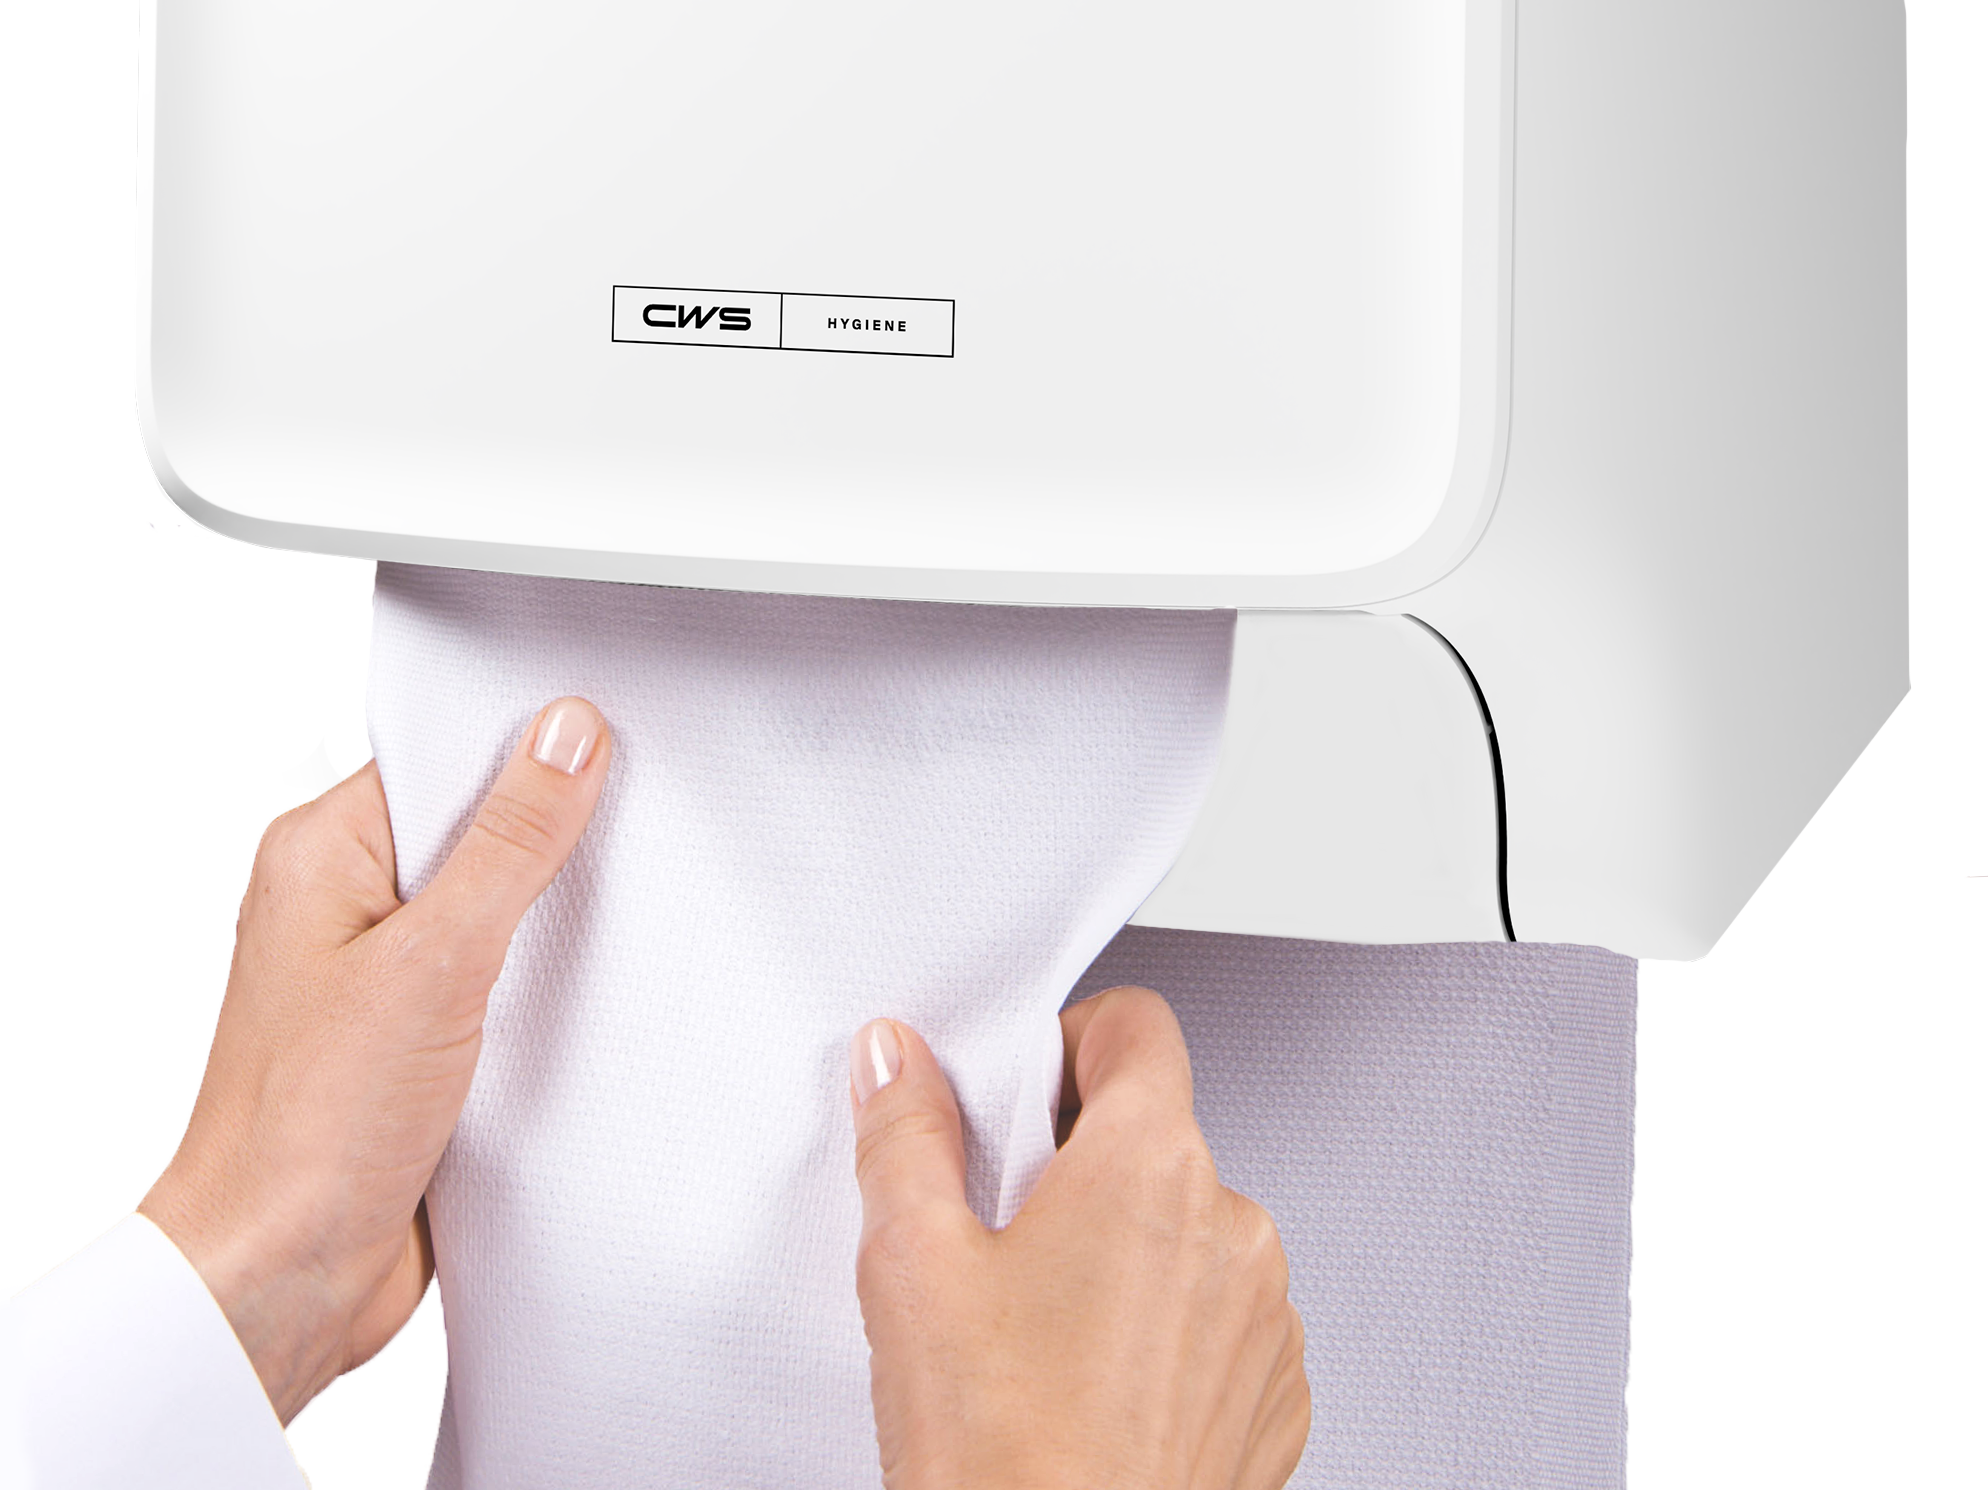 Drying hands, an indispensable step in hand hygiene